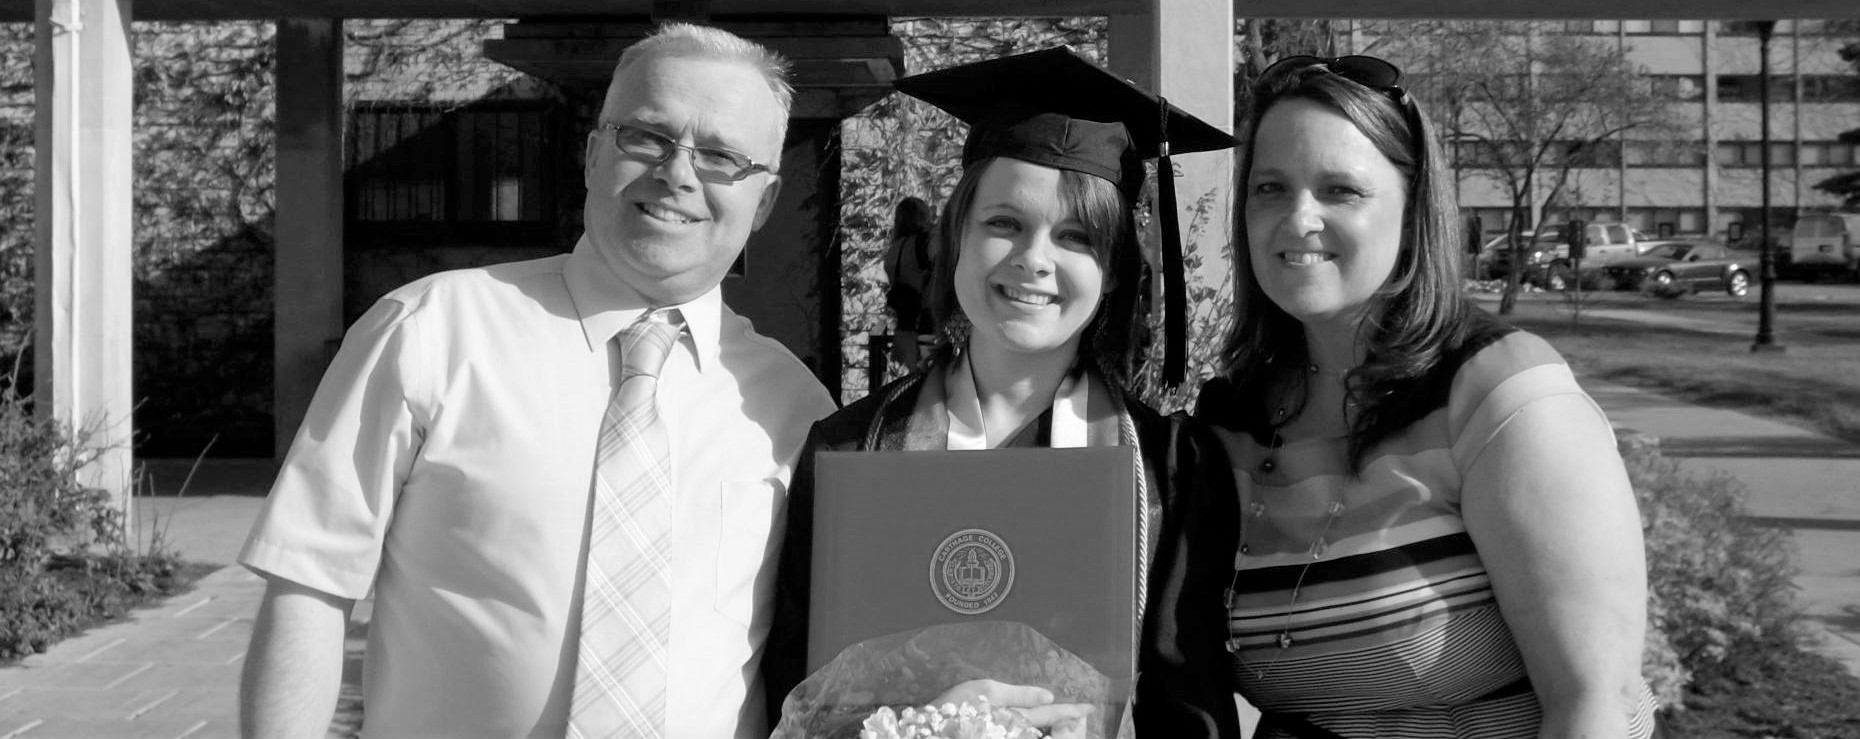 Ashley with her parents either side in full graduation robes holding a diploma and flowers